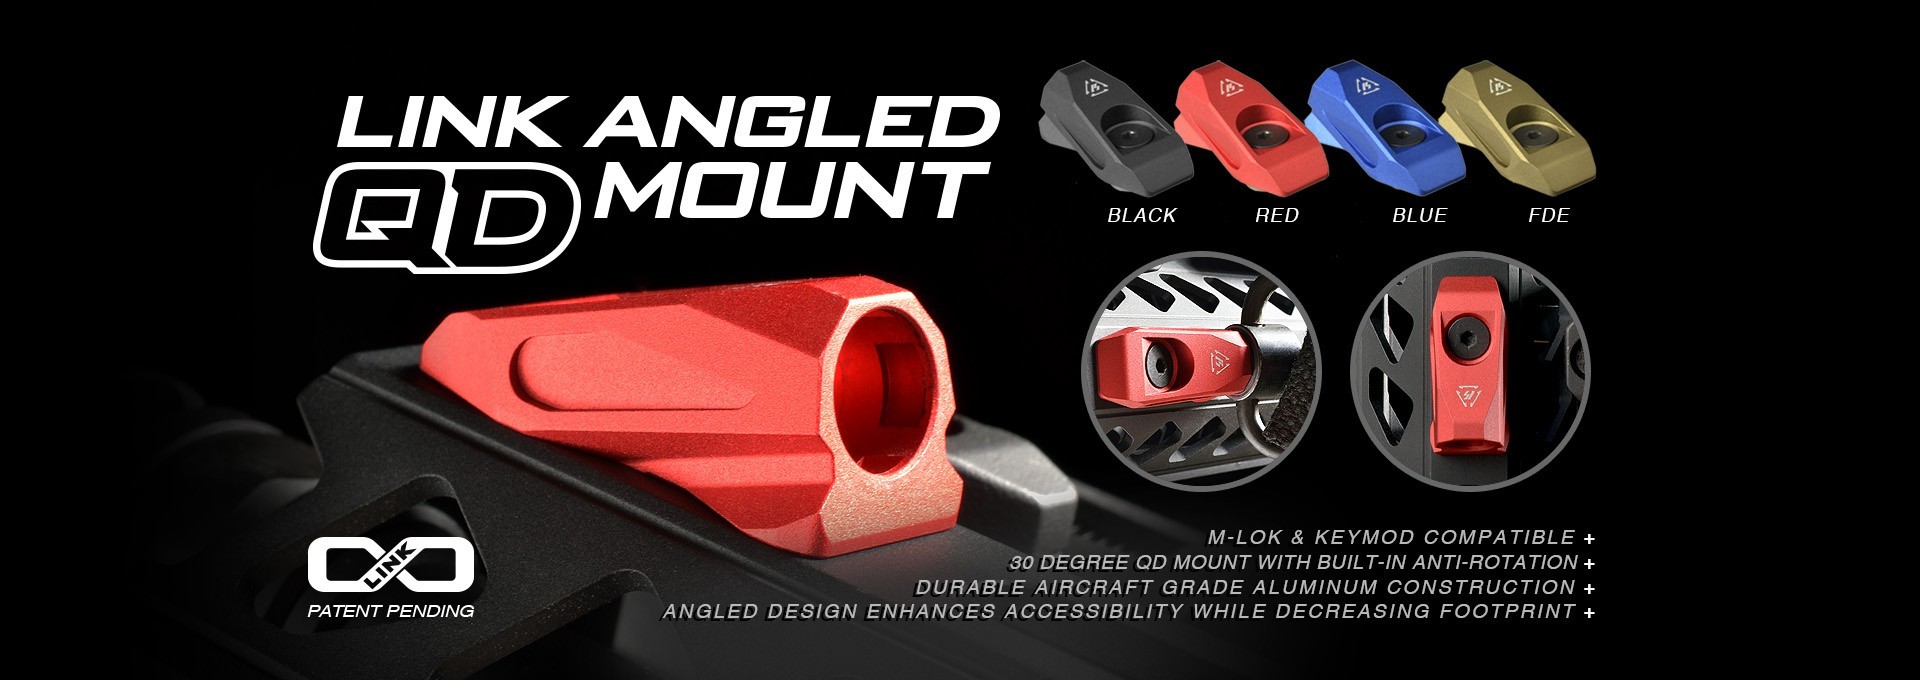 Strike Industries Link Angled QD Mount - Blue | Redcon1 Tactical